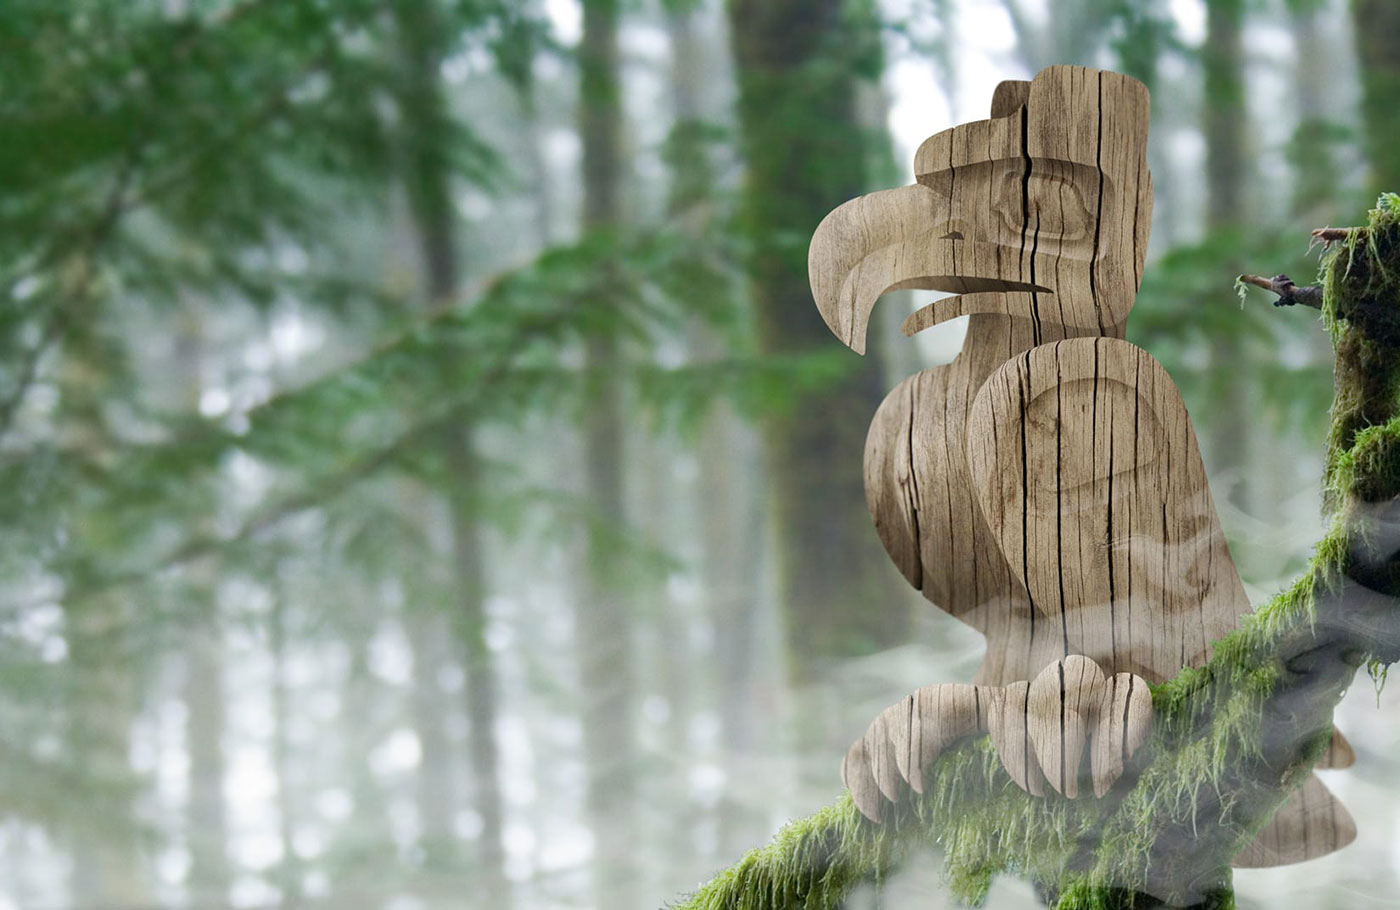 Image of misty woods on the West Coast with a branch covered in lush green moss in the foreground. The branch has a hand-carved wooden eagle statue in the West Coast Style perched upon it.